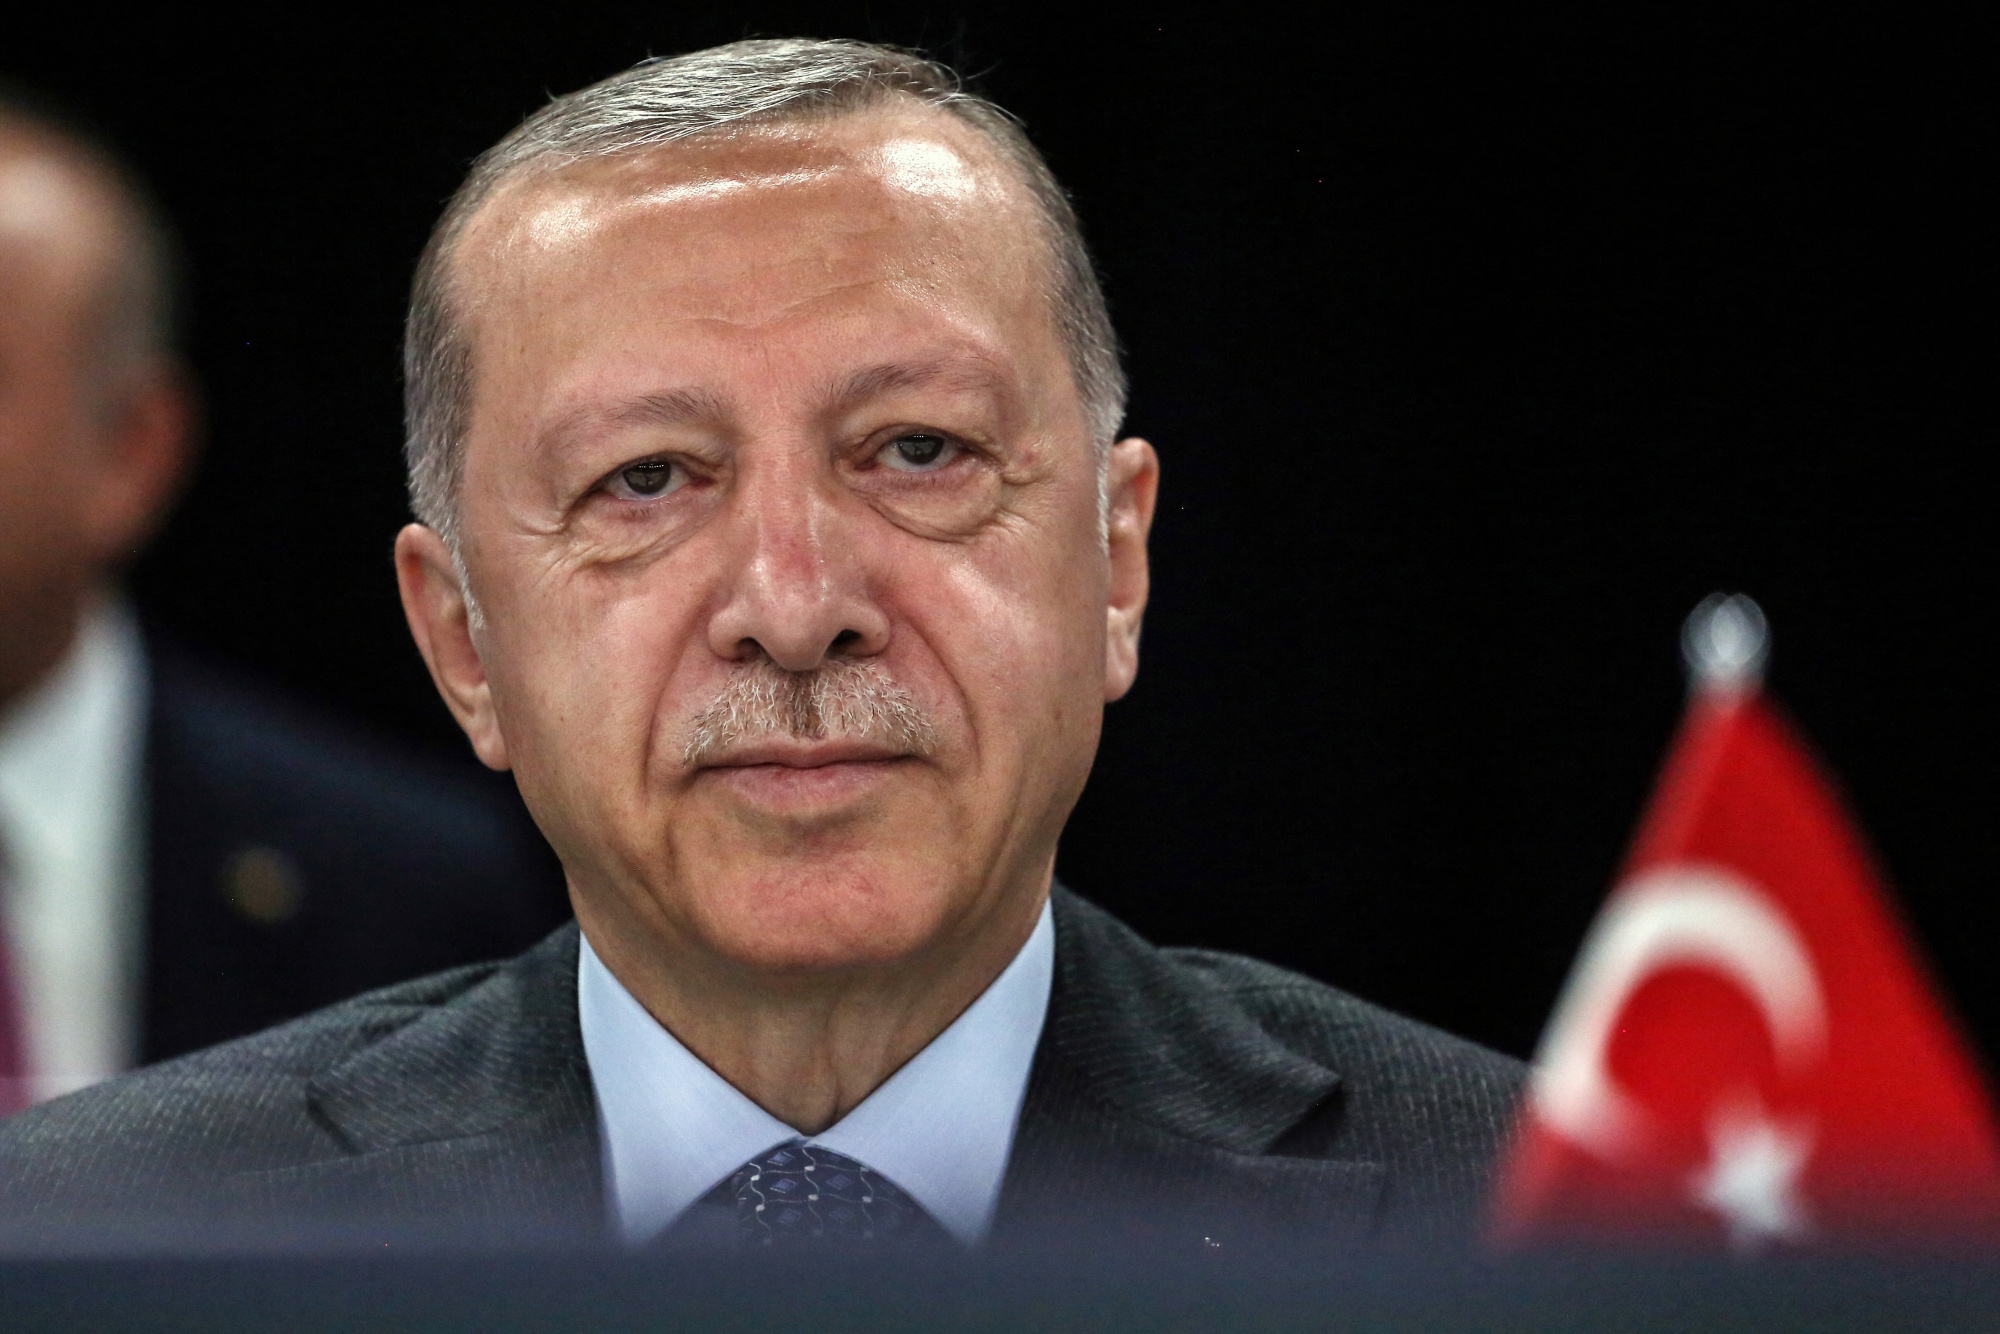 BLOOMBERG: Turkey’s Leader Warns Greece Its Missiles Can Hit Athens